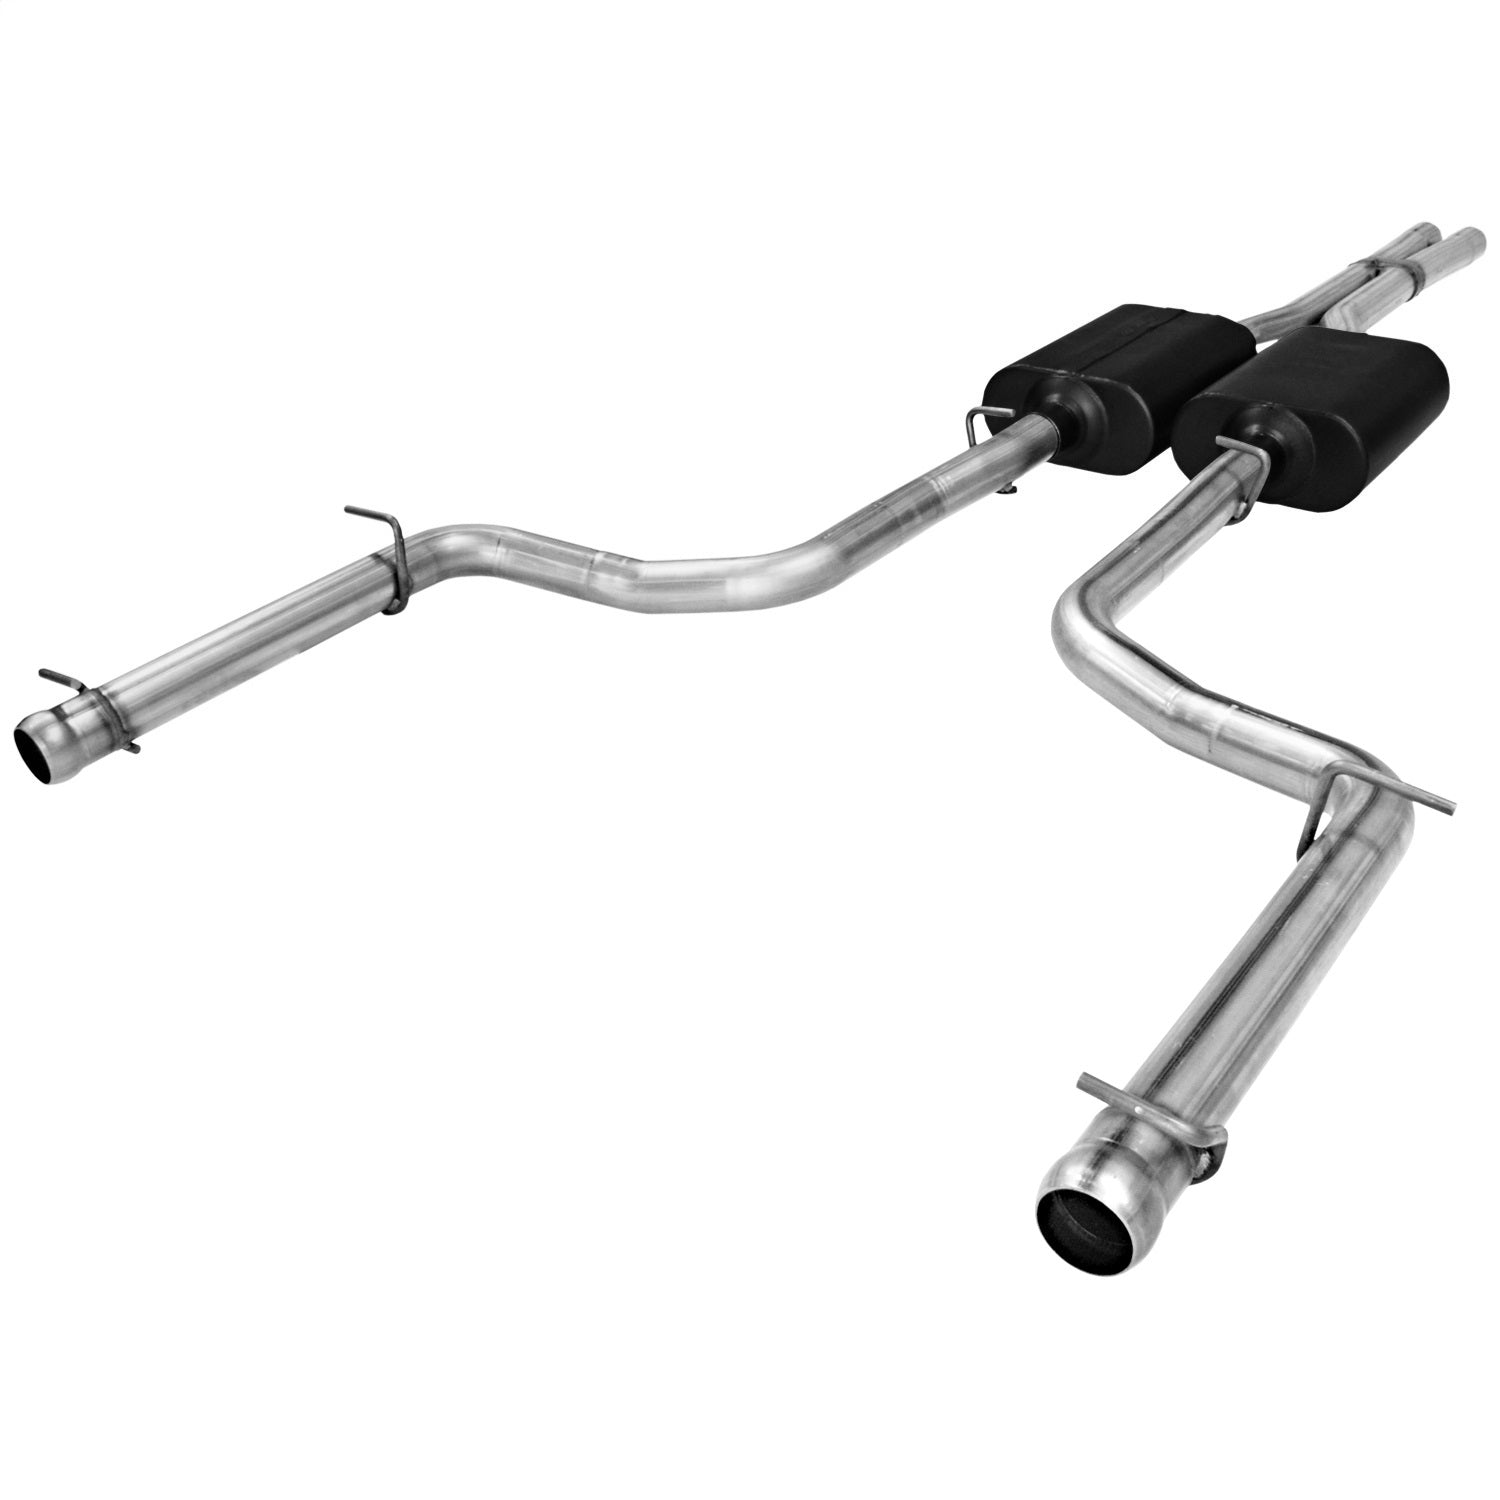 Flowmaster 817479 American Thunder Cat Back Exhaust System Fits 09-14 Challenger